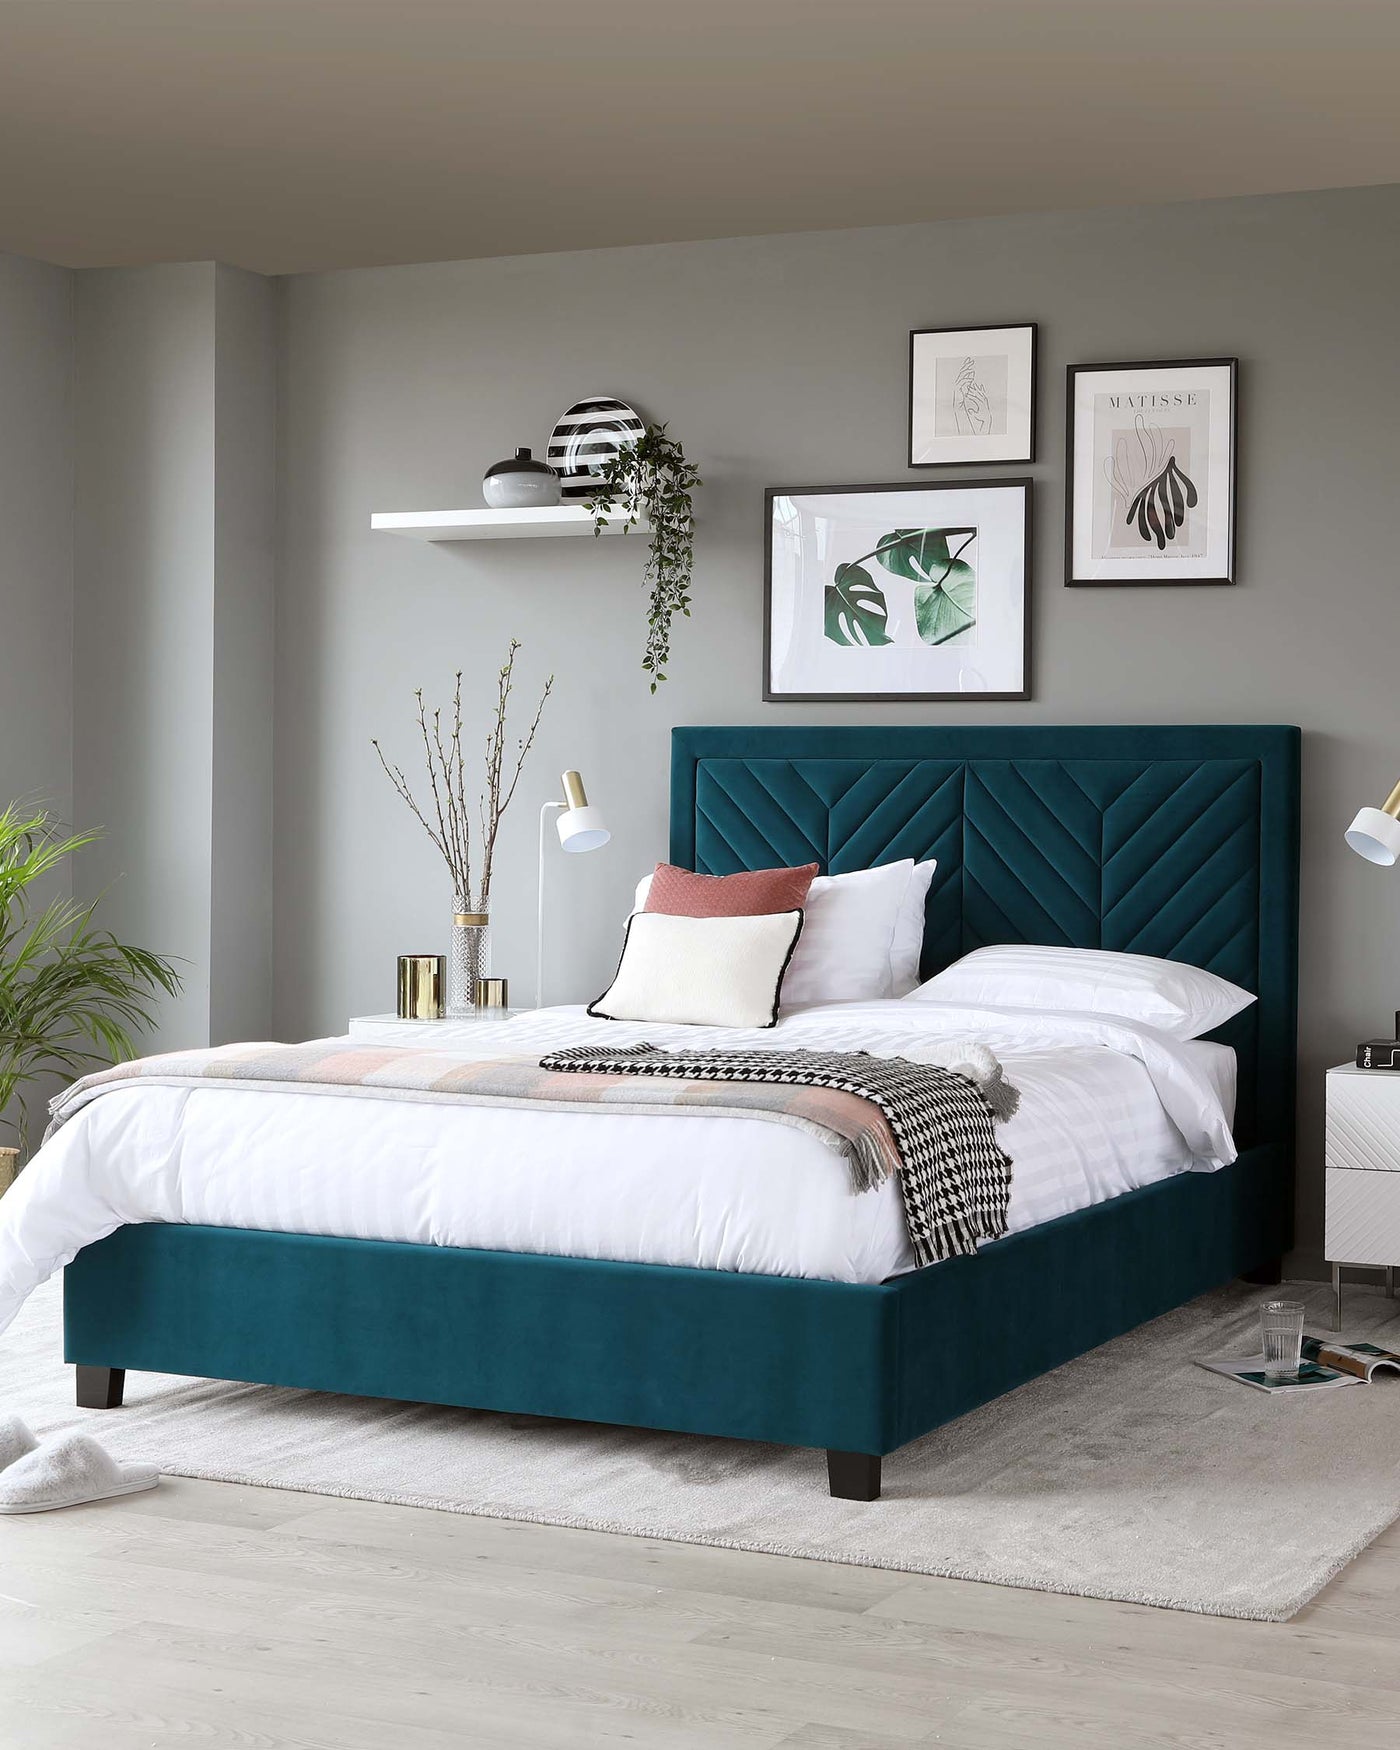 A luxurious teal upholstered bed with a tall, tufted headboard and a low-profile footboard, set on dark wooden legs. Coordinated bedding in white and shades of pink with a checkered throw complements the bed's rich colour. Two white minimalist bedside lamps provide symmetry, while a single floating shelf above the bed offers space for decorative items. The room is completed with a light grey area rug and two white bedside tables flanking the bed, enhancing the elegant and contemporary aesthetic.